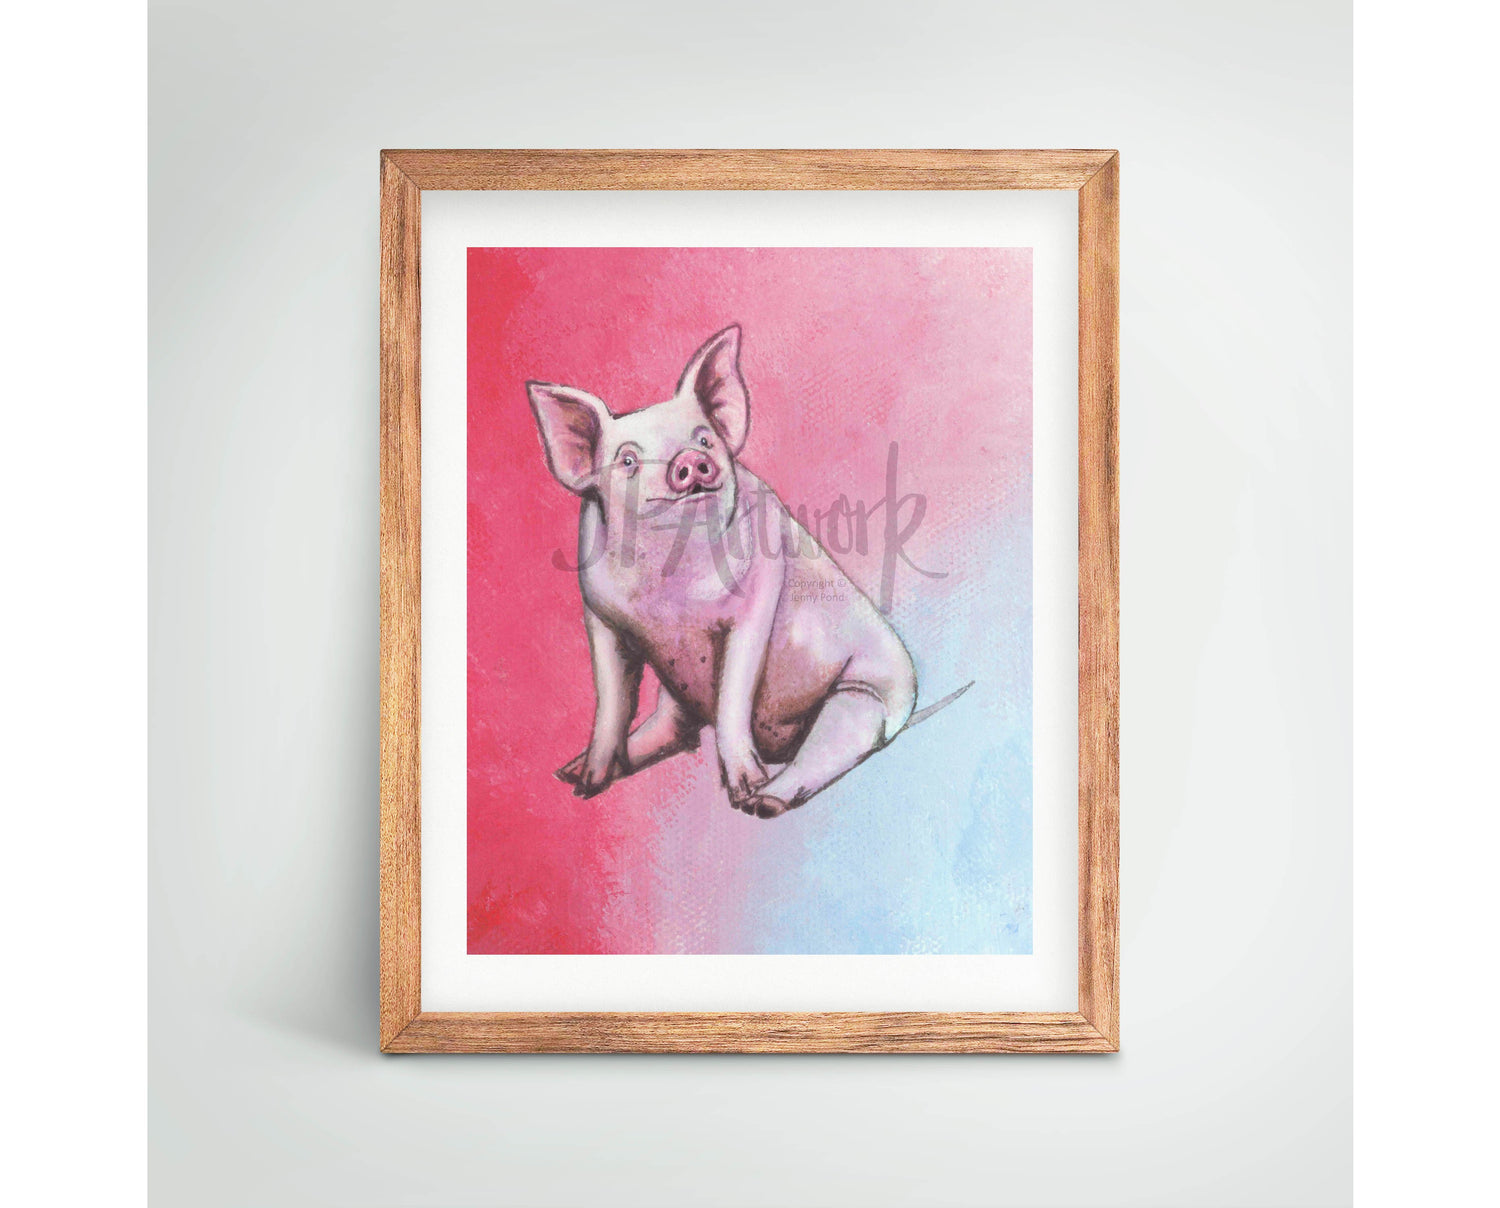 Mock Up of a Pig Art Print (featuring a young pig sitting down) in a wood frame. Artwork by Jenny Pond, JP Artwork